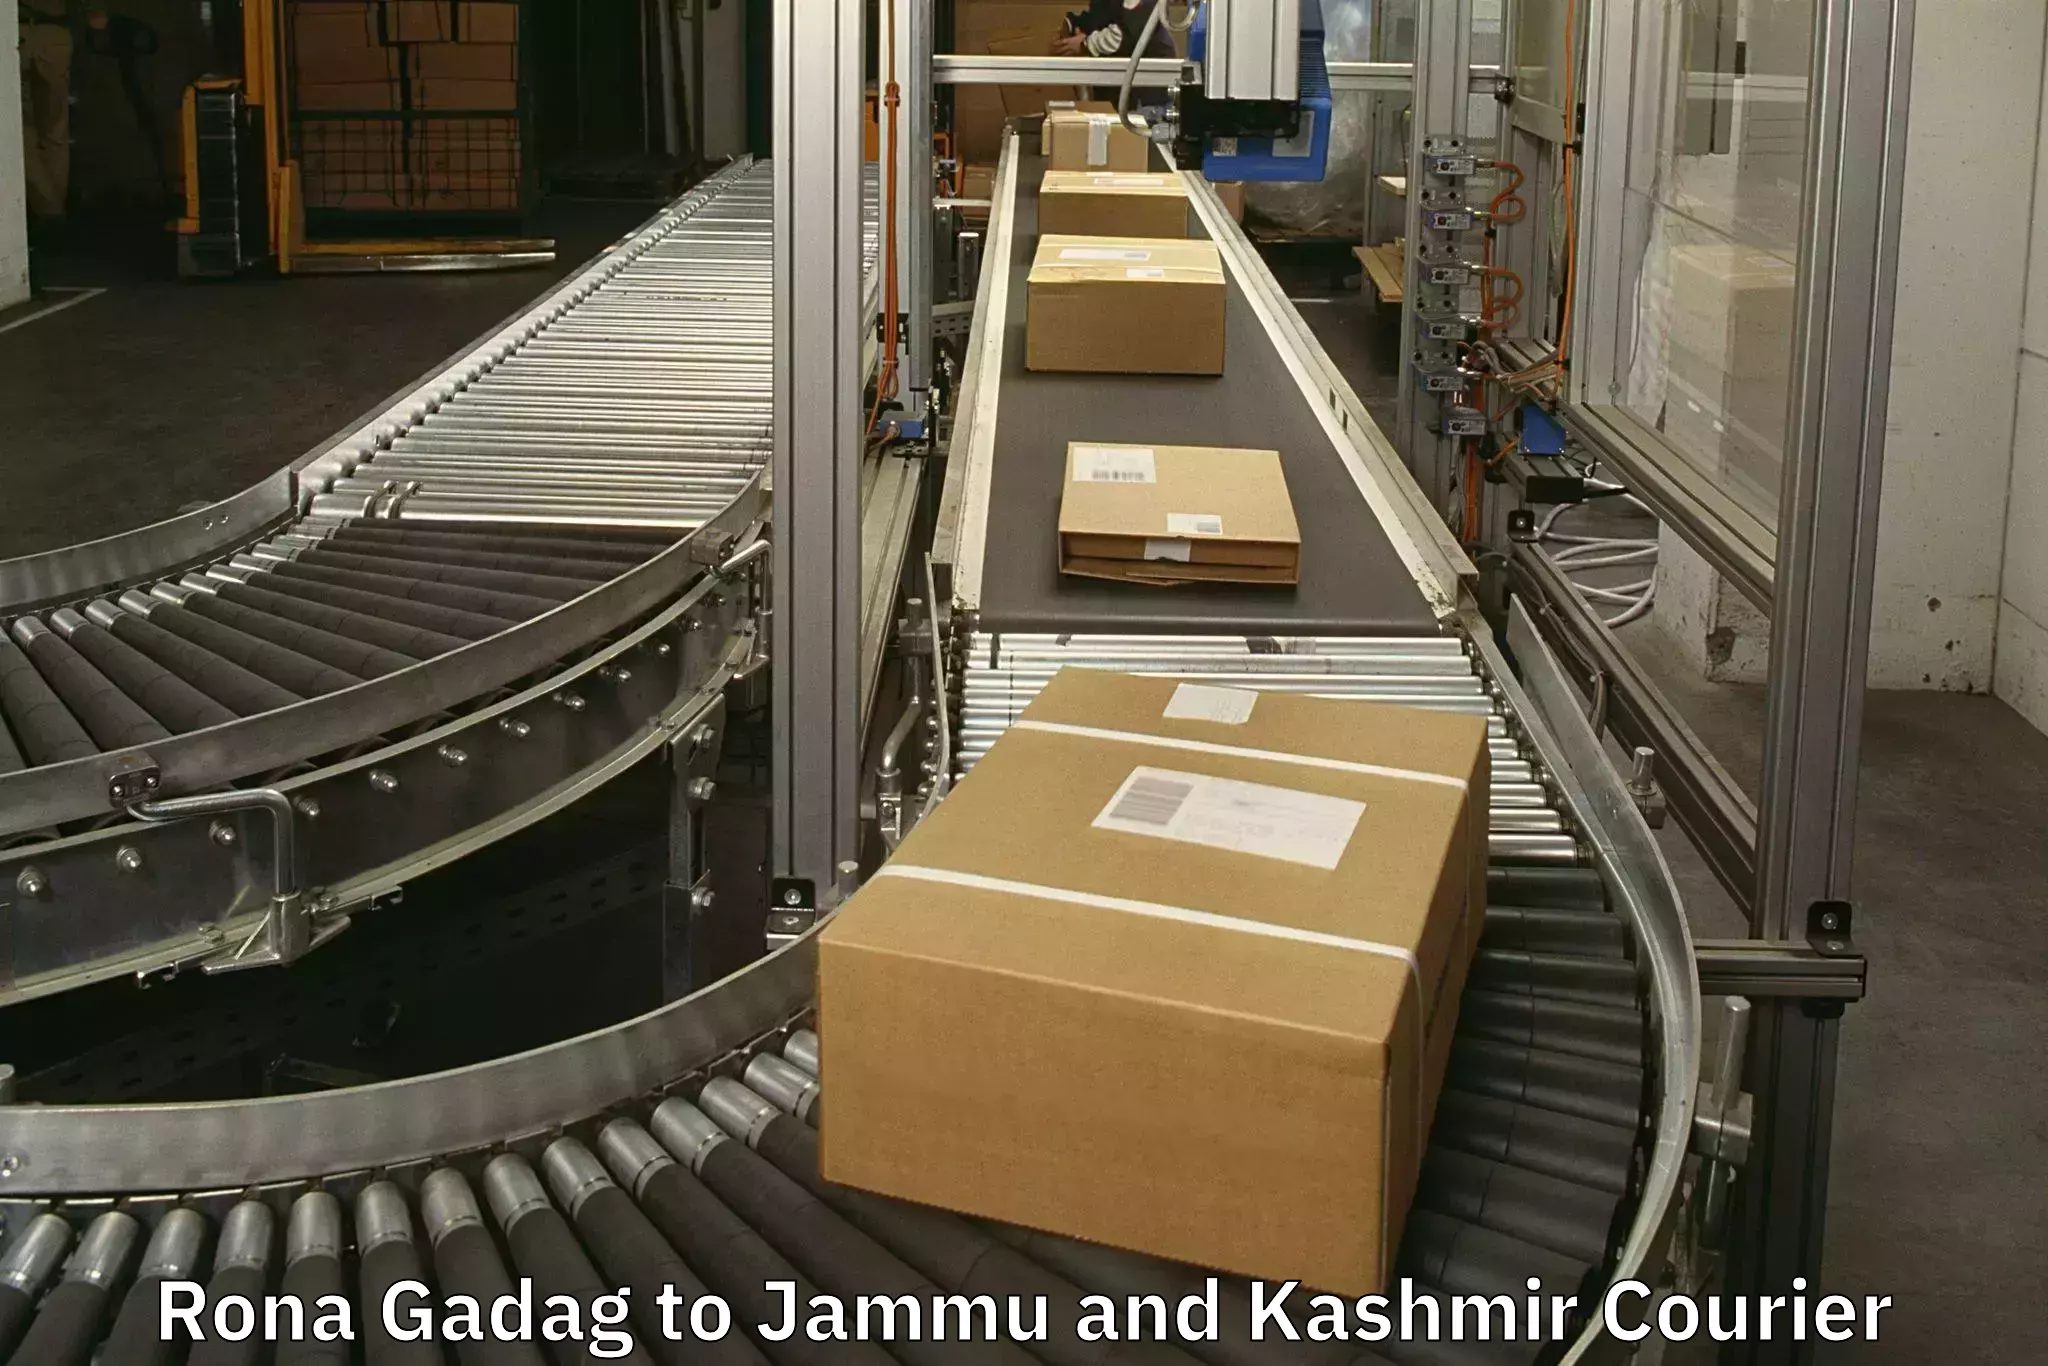 Luggage delivery network Rona Gadag to Jammu and Kashmir